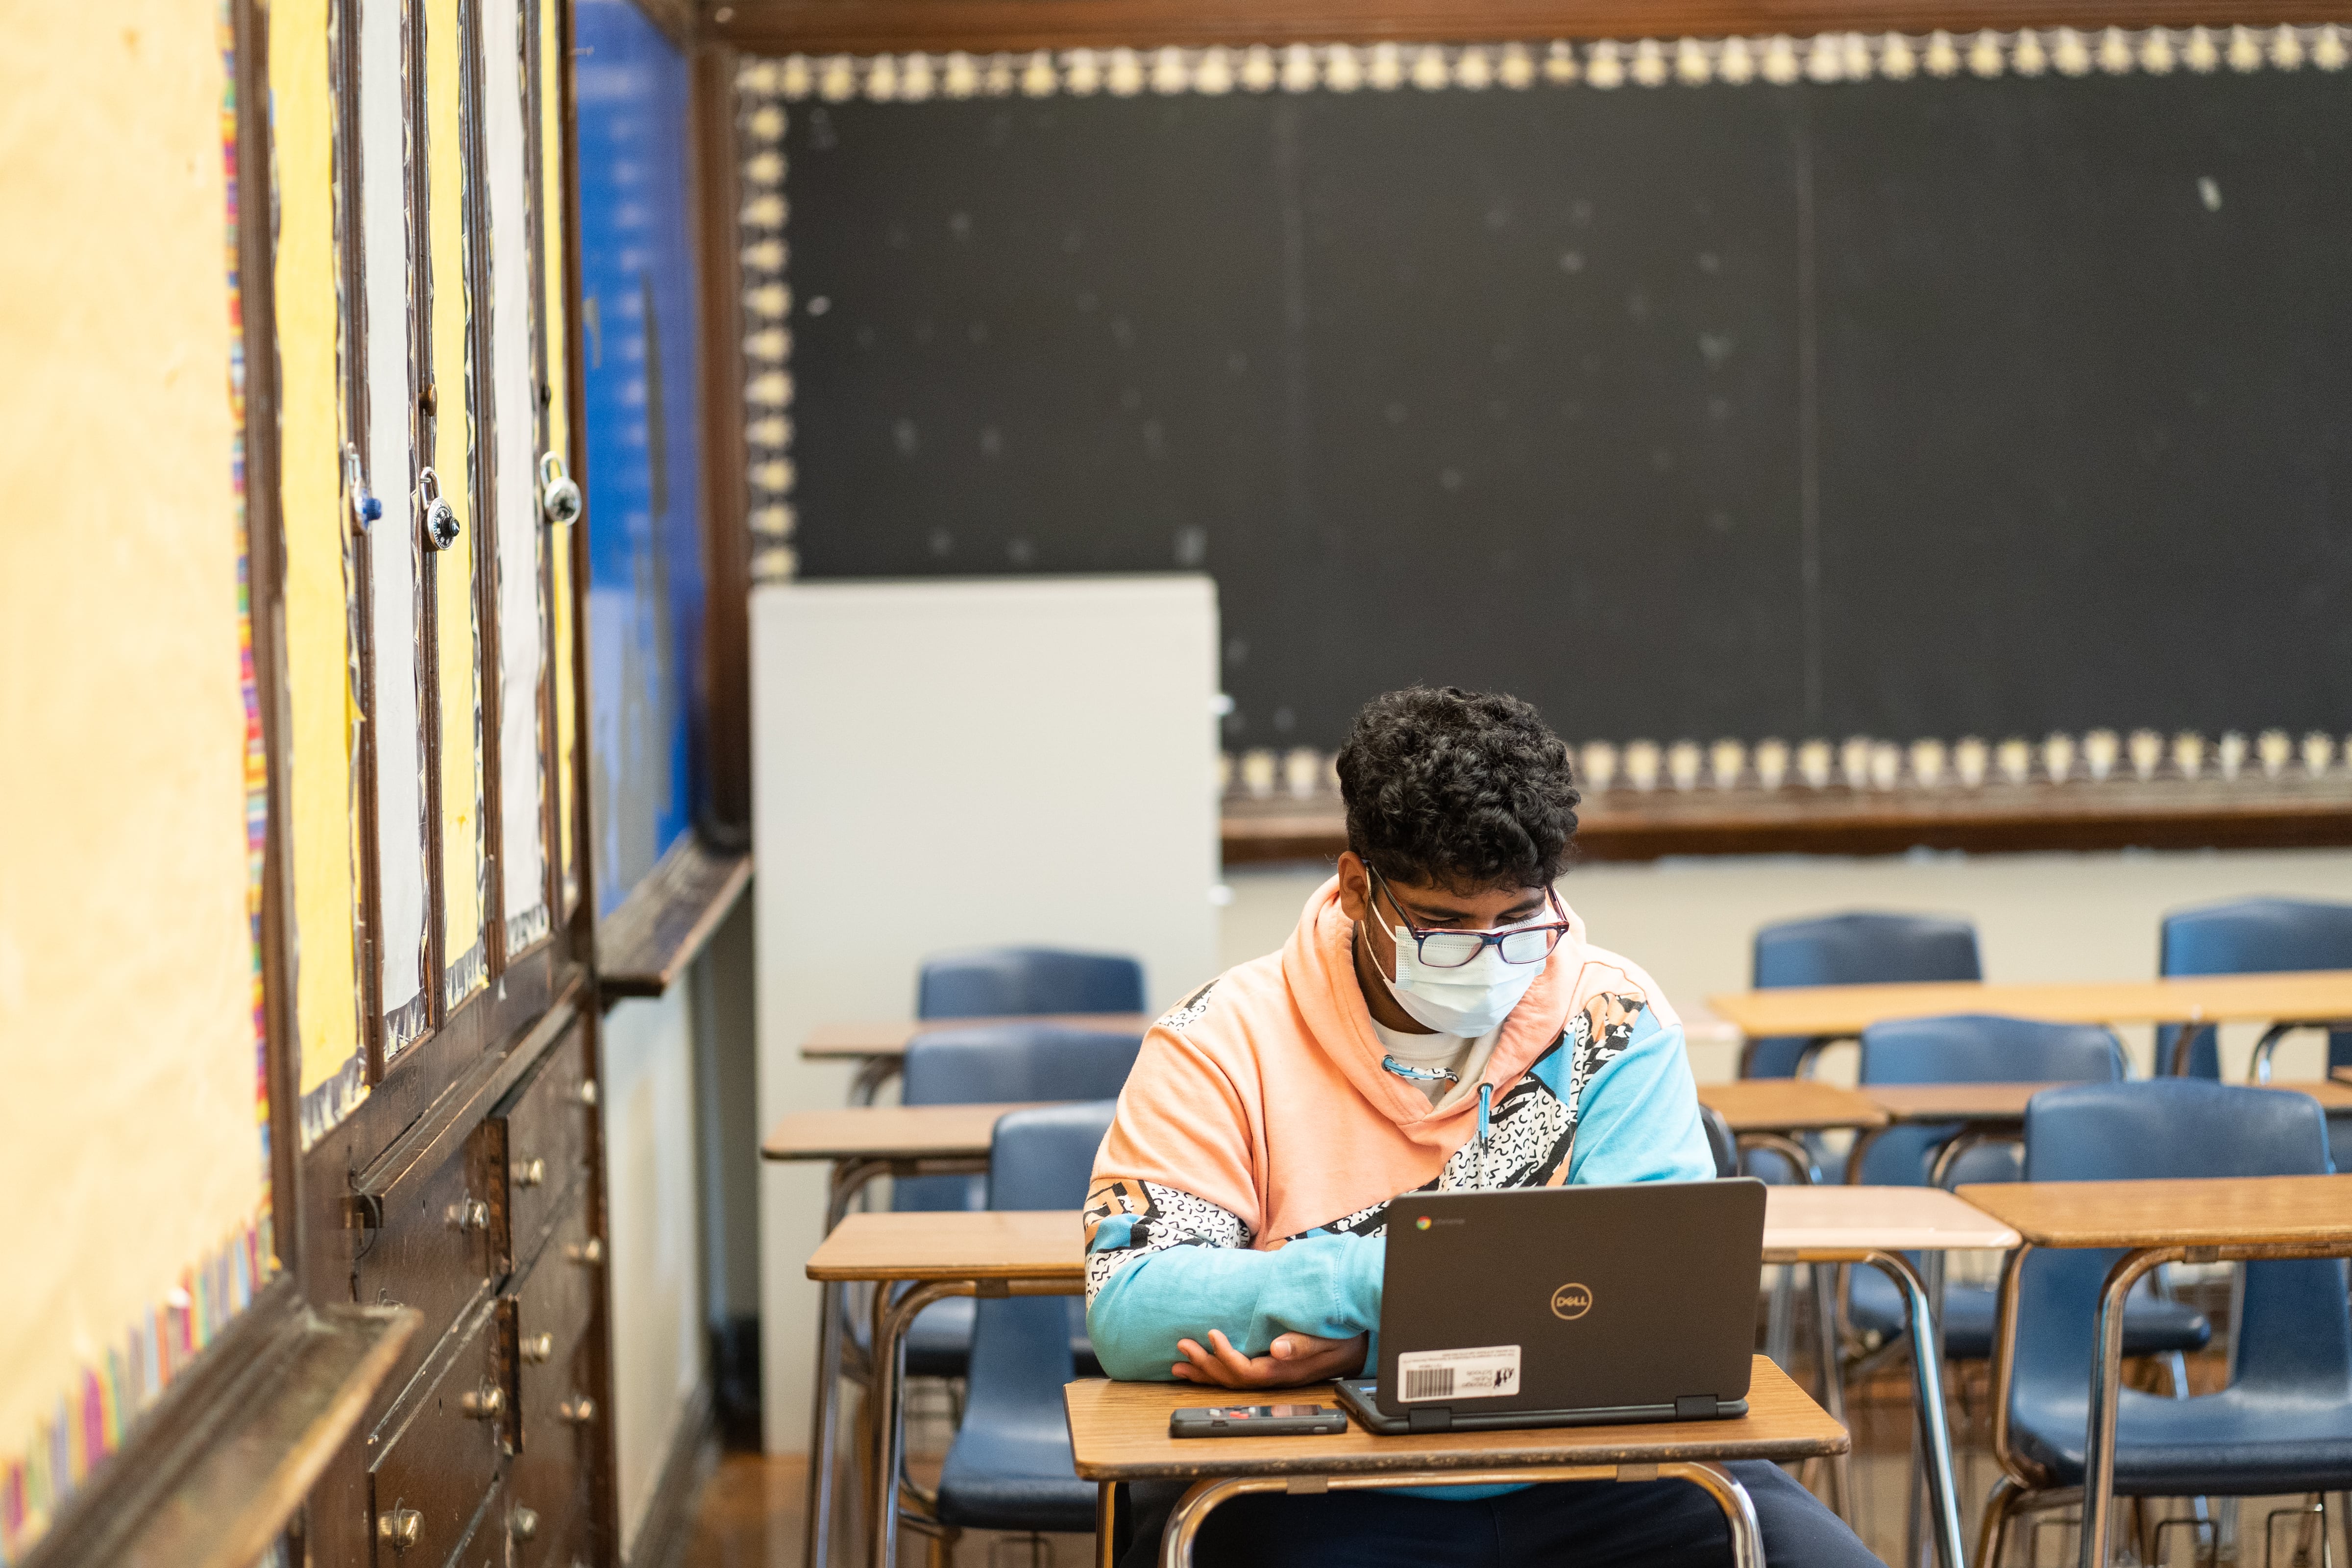 A young man wearing a pink, blue, and white hoodie works in an empty classroom on his computer.